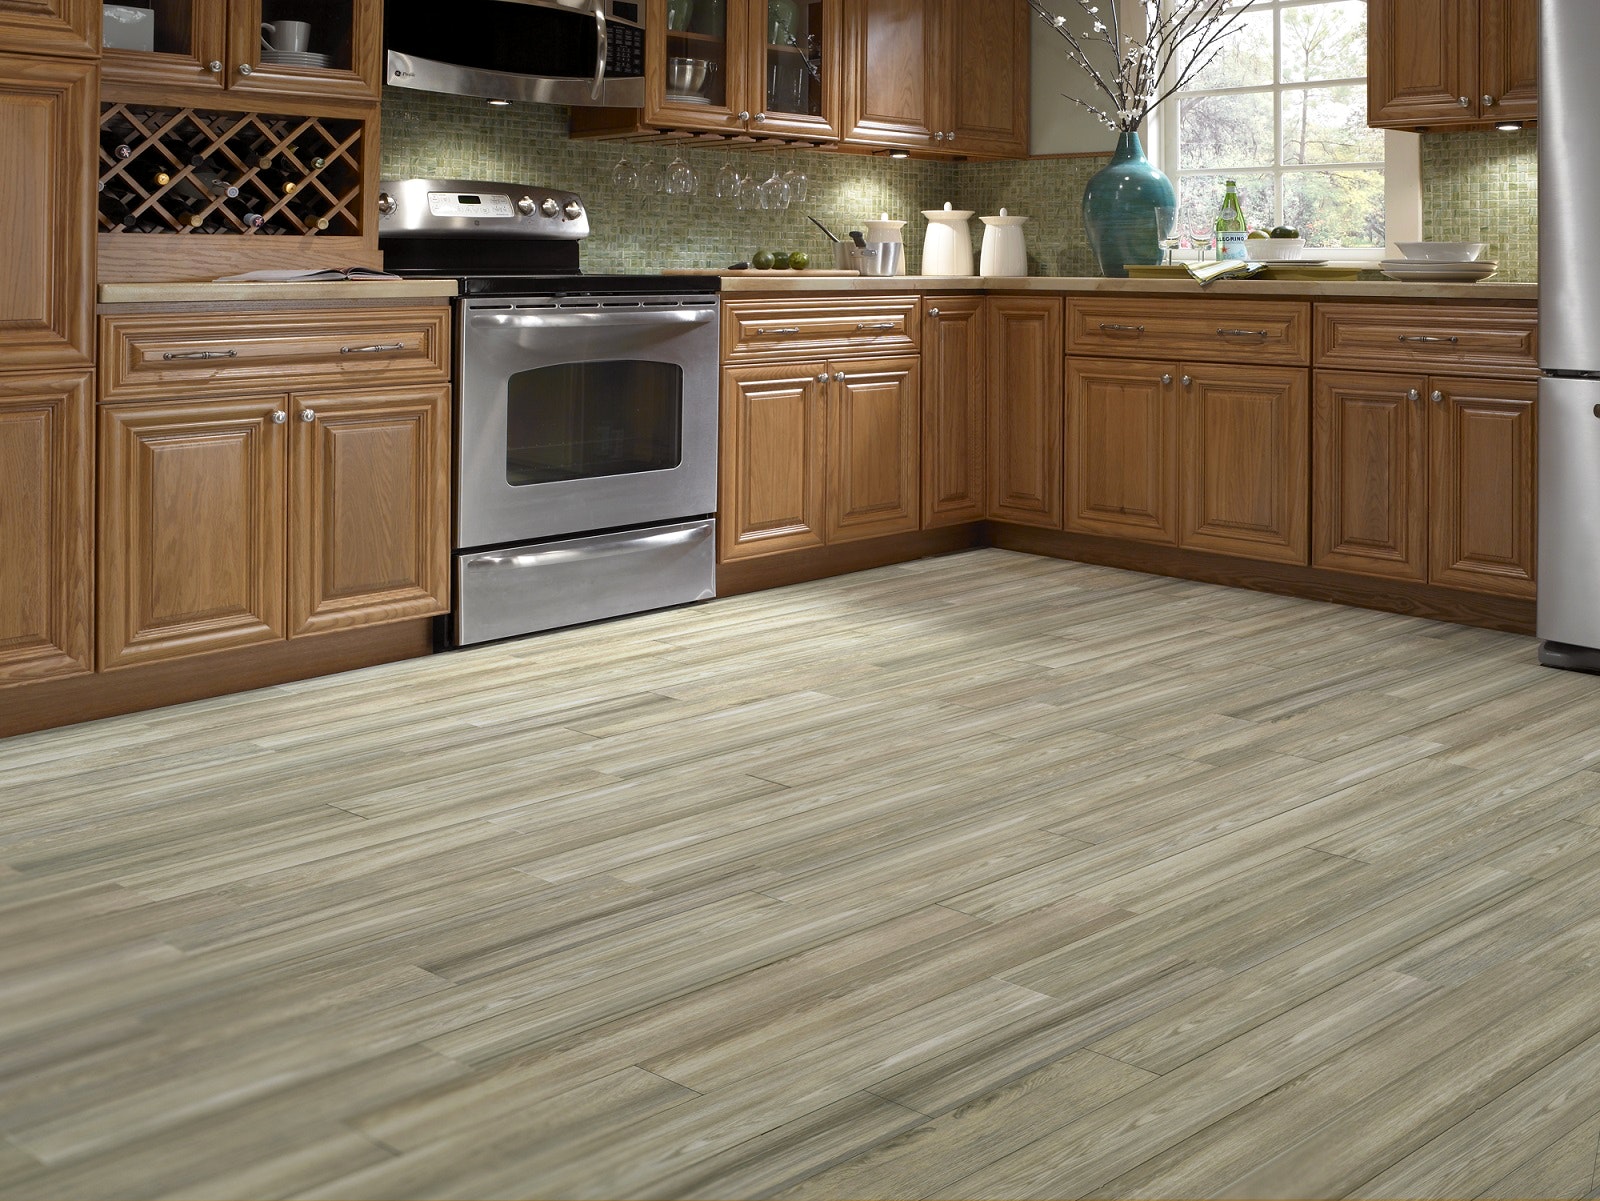 laminate ideas new full size of small kitchen ideas:floating laminate flooring the tile  pictures of UNBGQTE